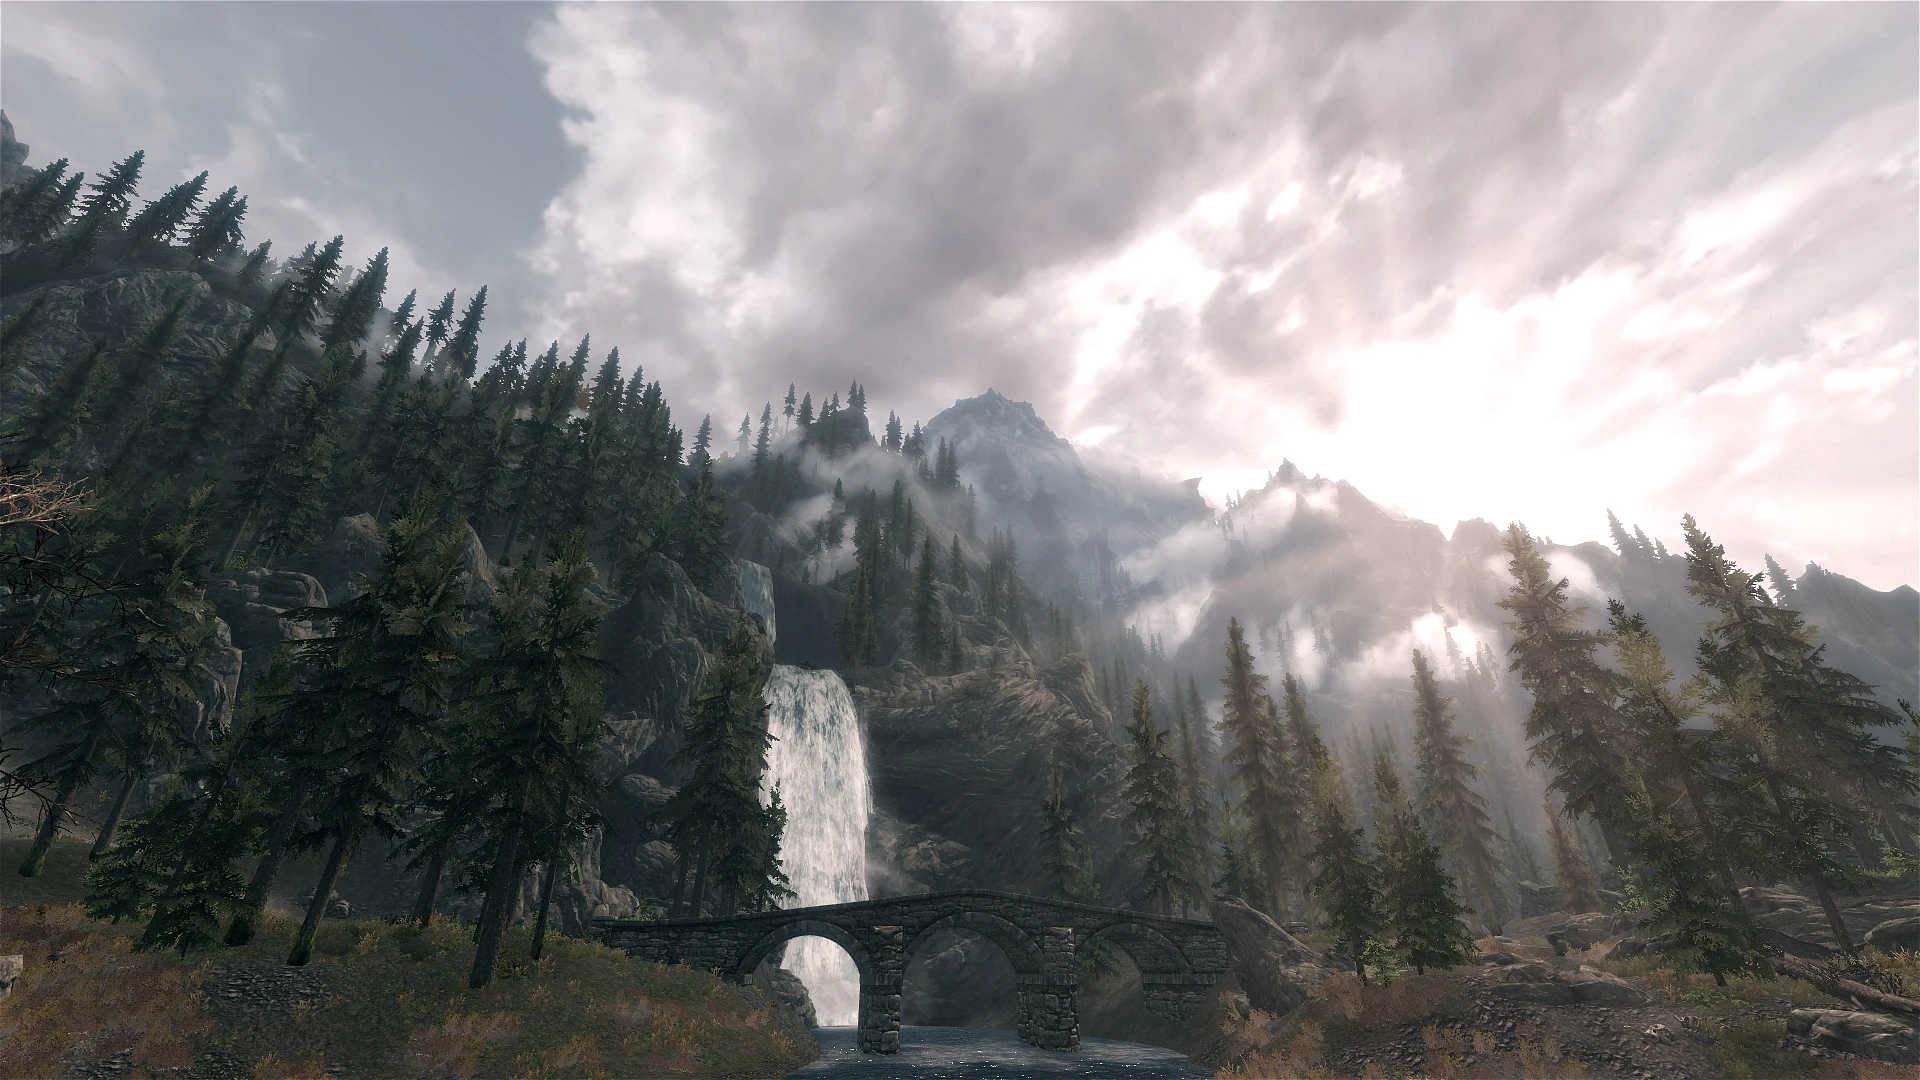 The beauty of Skyrim Unedited in game screenshot 3.